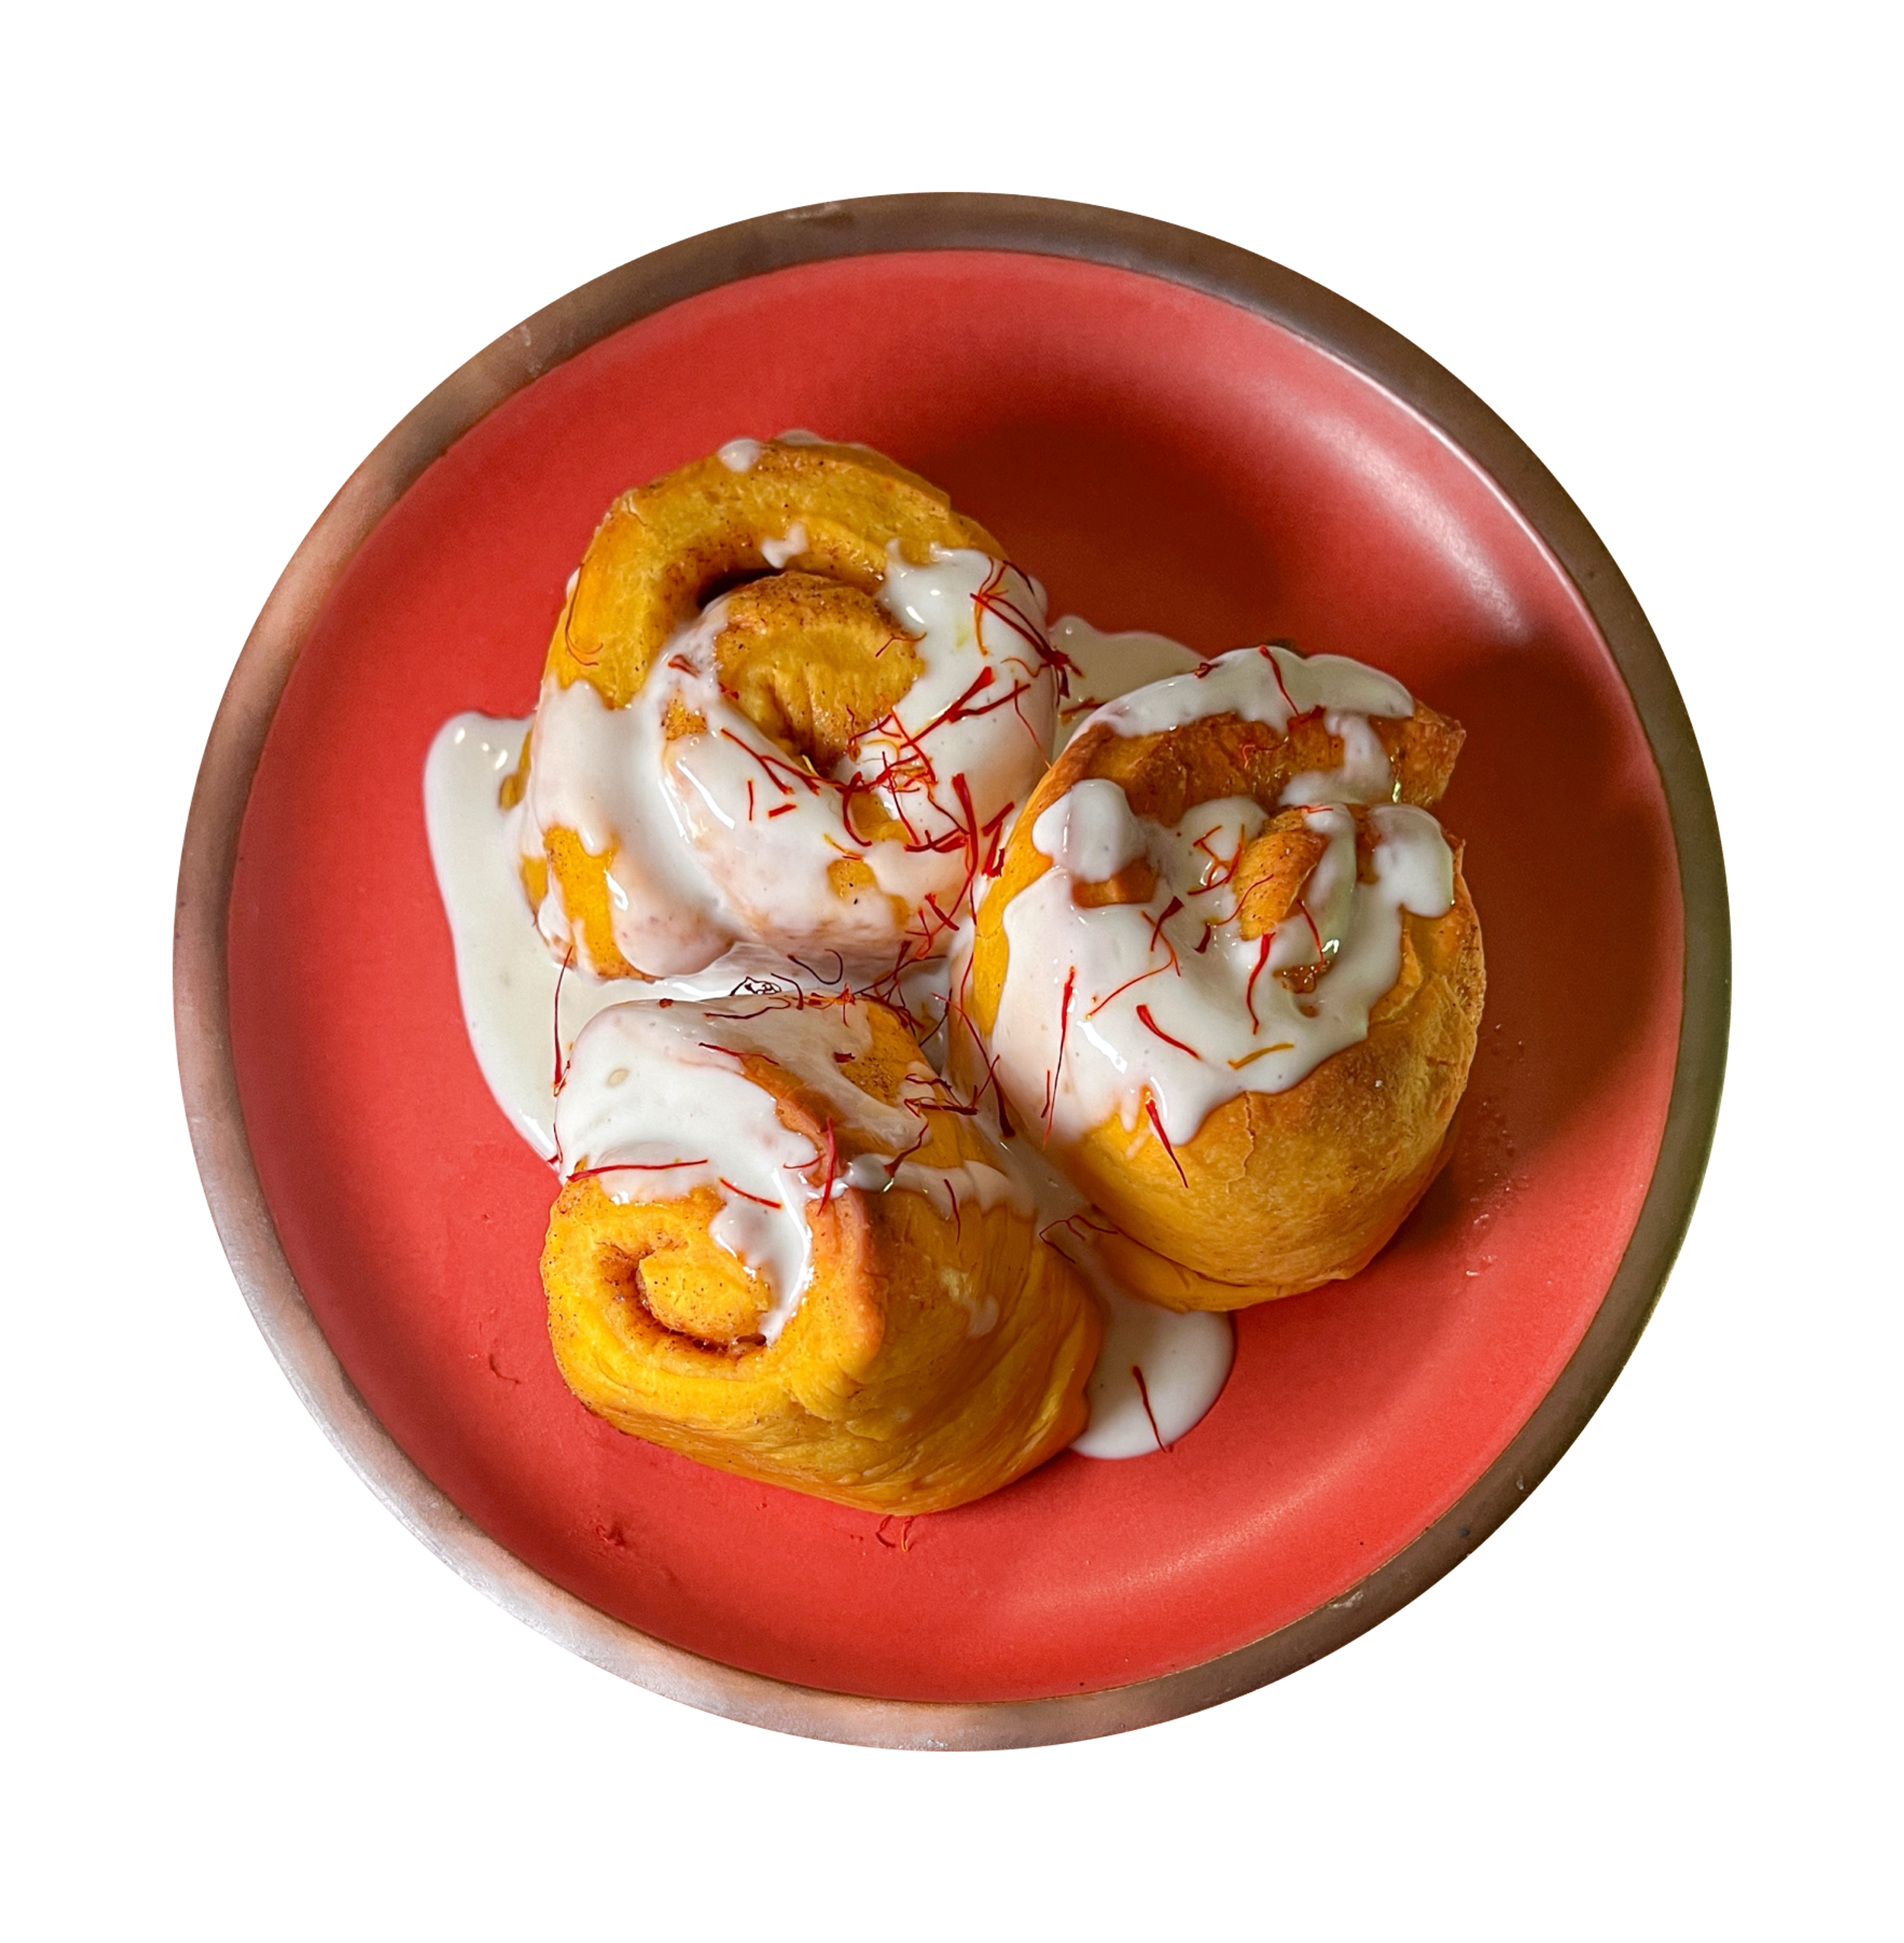 saffron rolls with labneh frosting